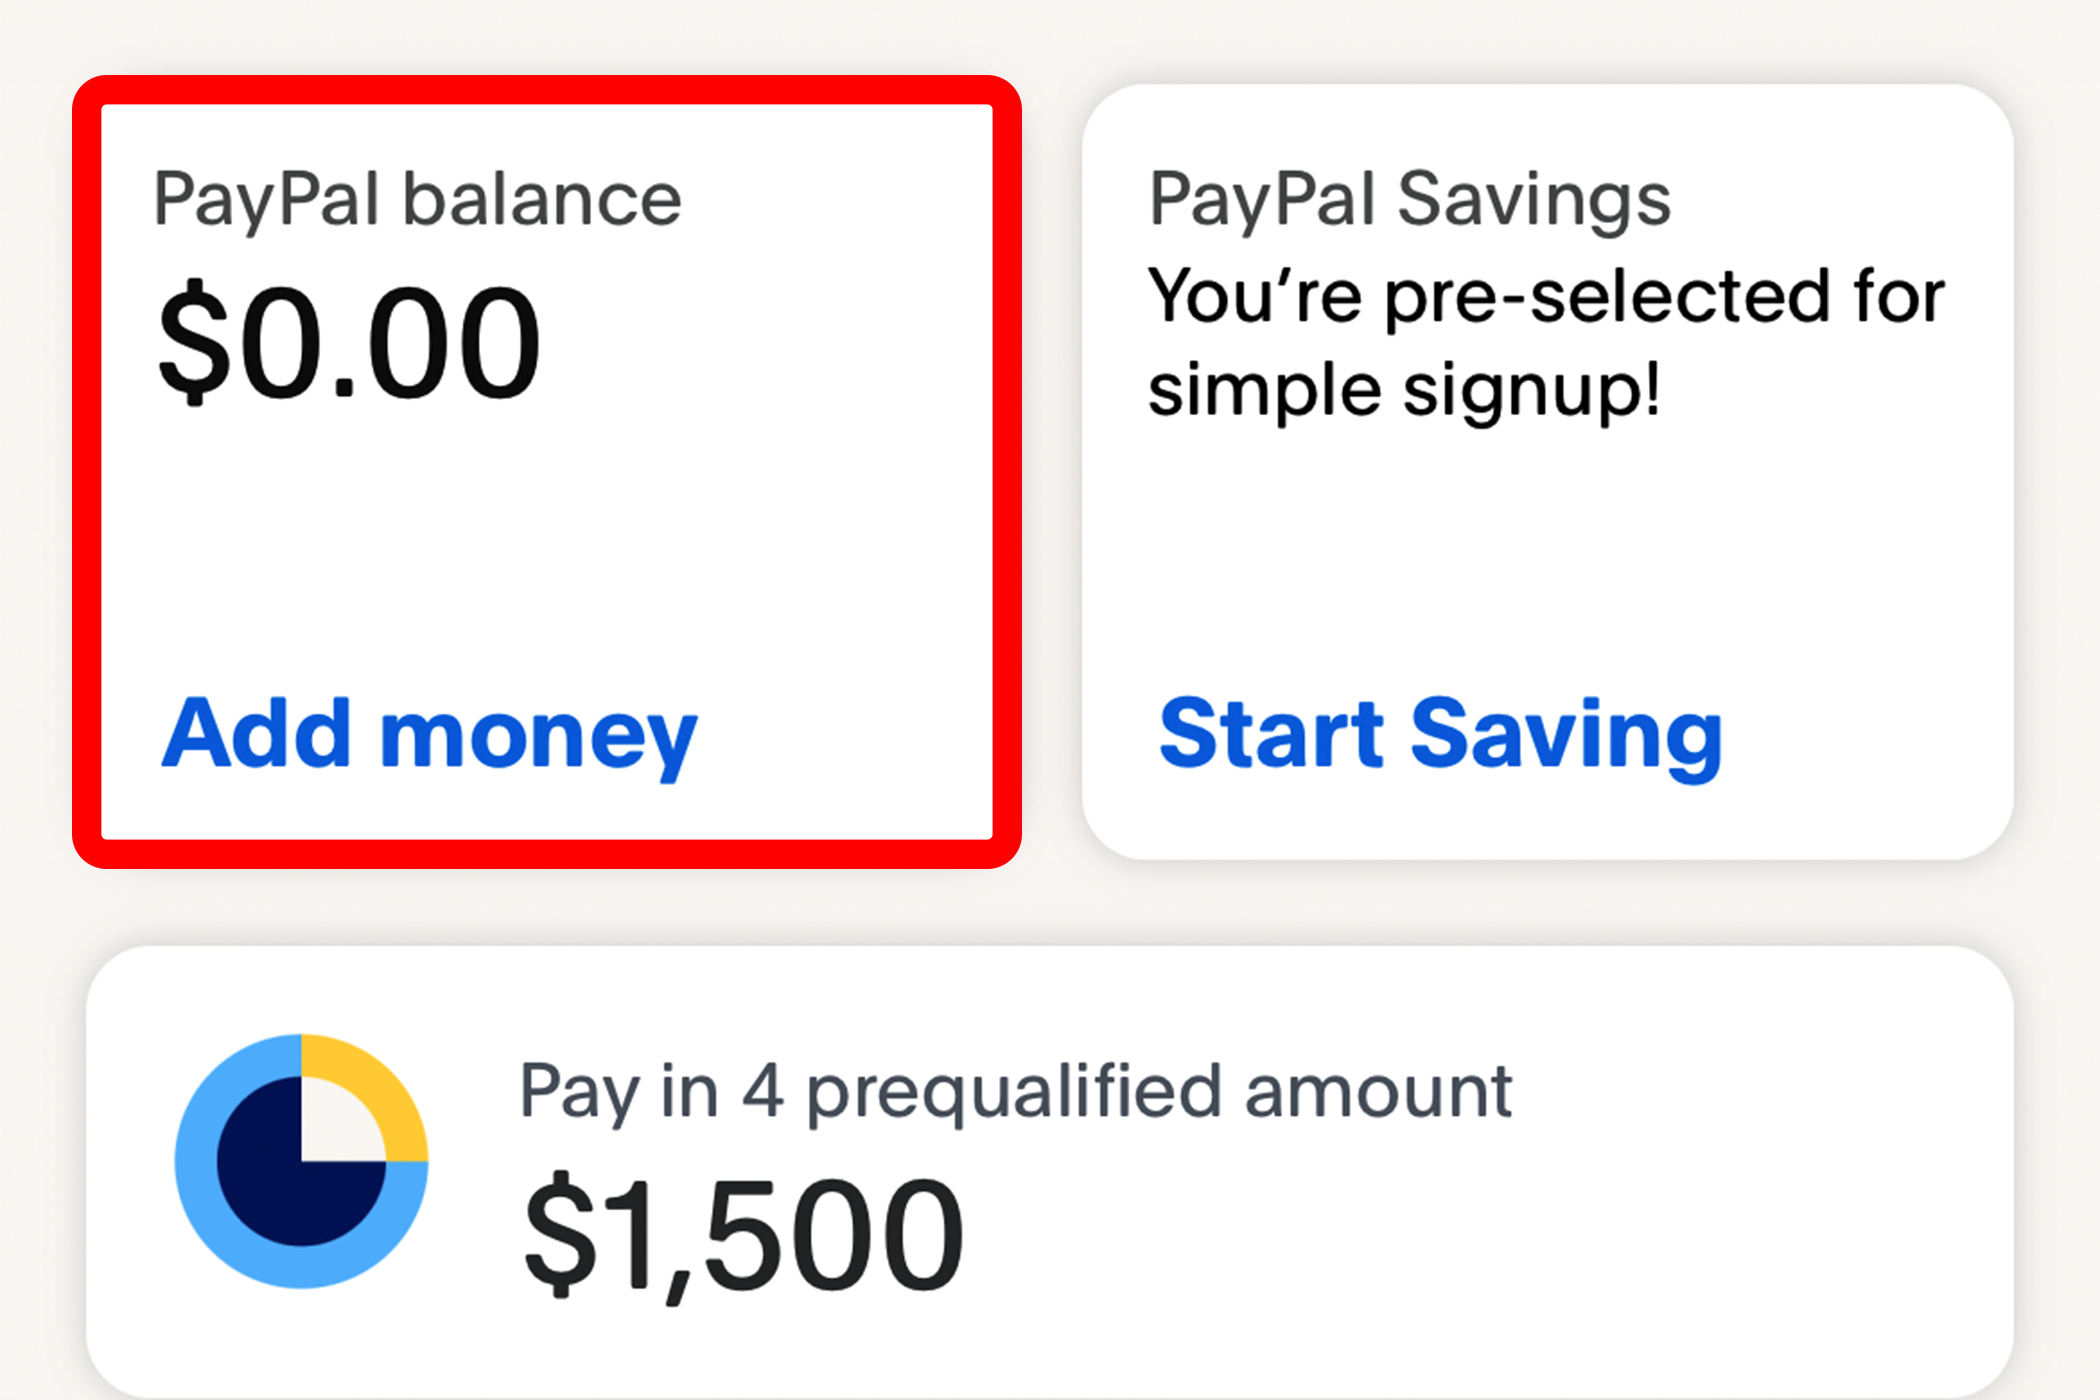 Selecting the 'Add money' button in the Paypal app.